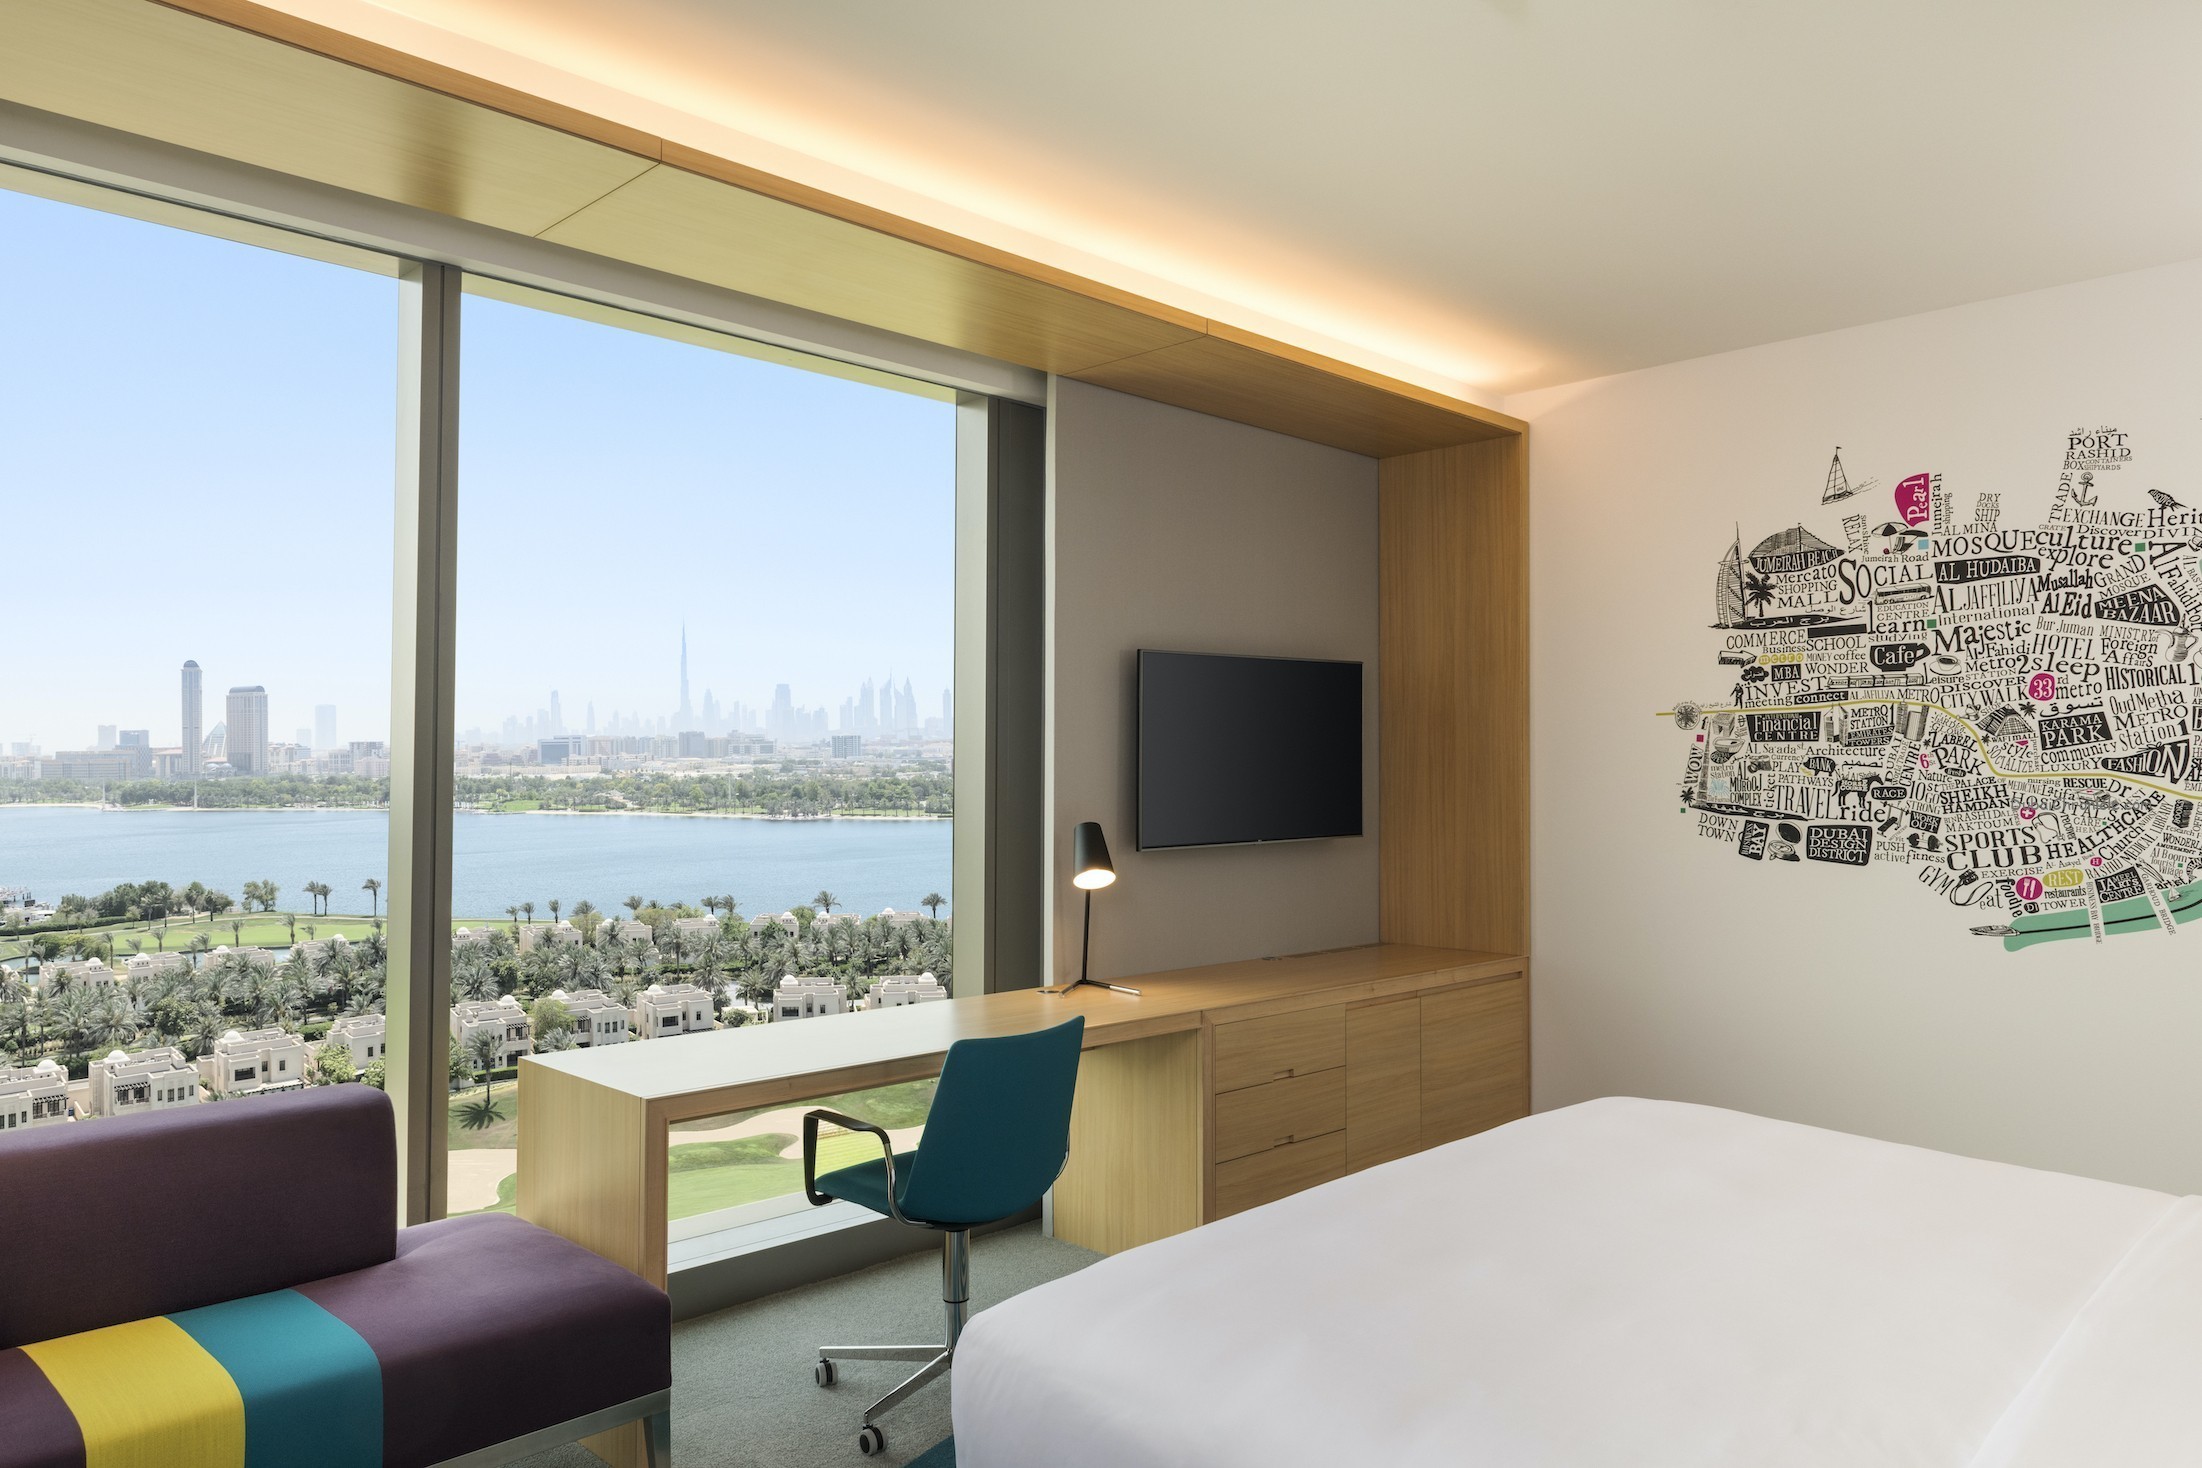 Enjoy a staycation season like no other with super value deals available for one day only as part of the first-ever Dubai Summer Surprises (DSS)  24 Hour Flash Sale.